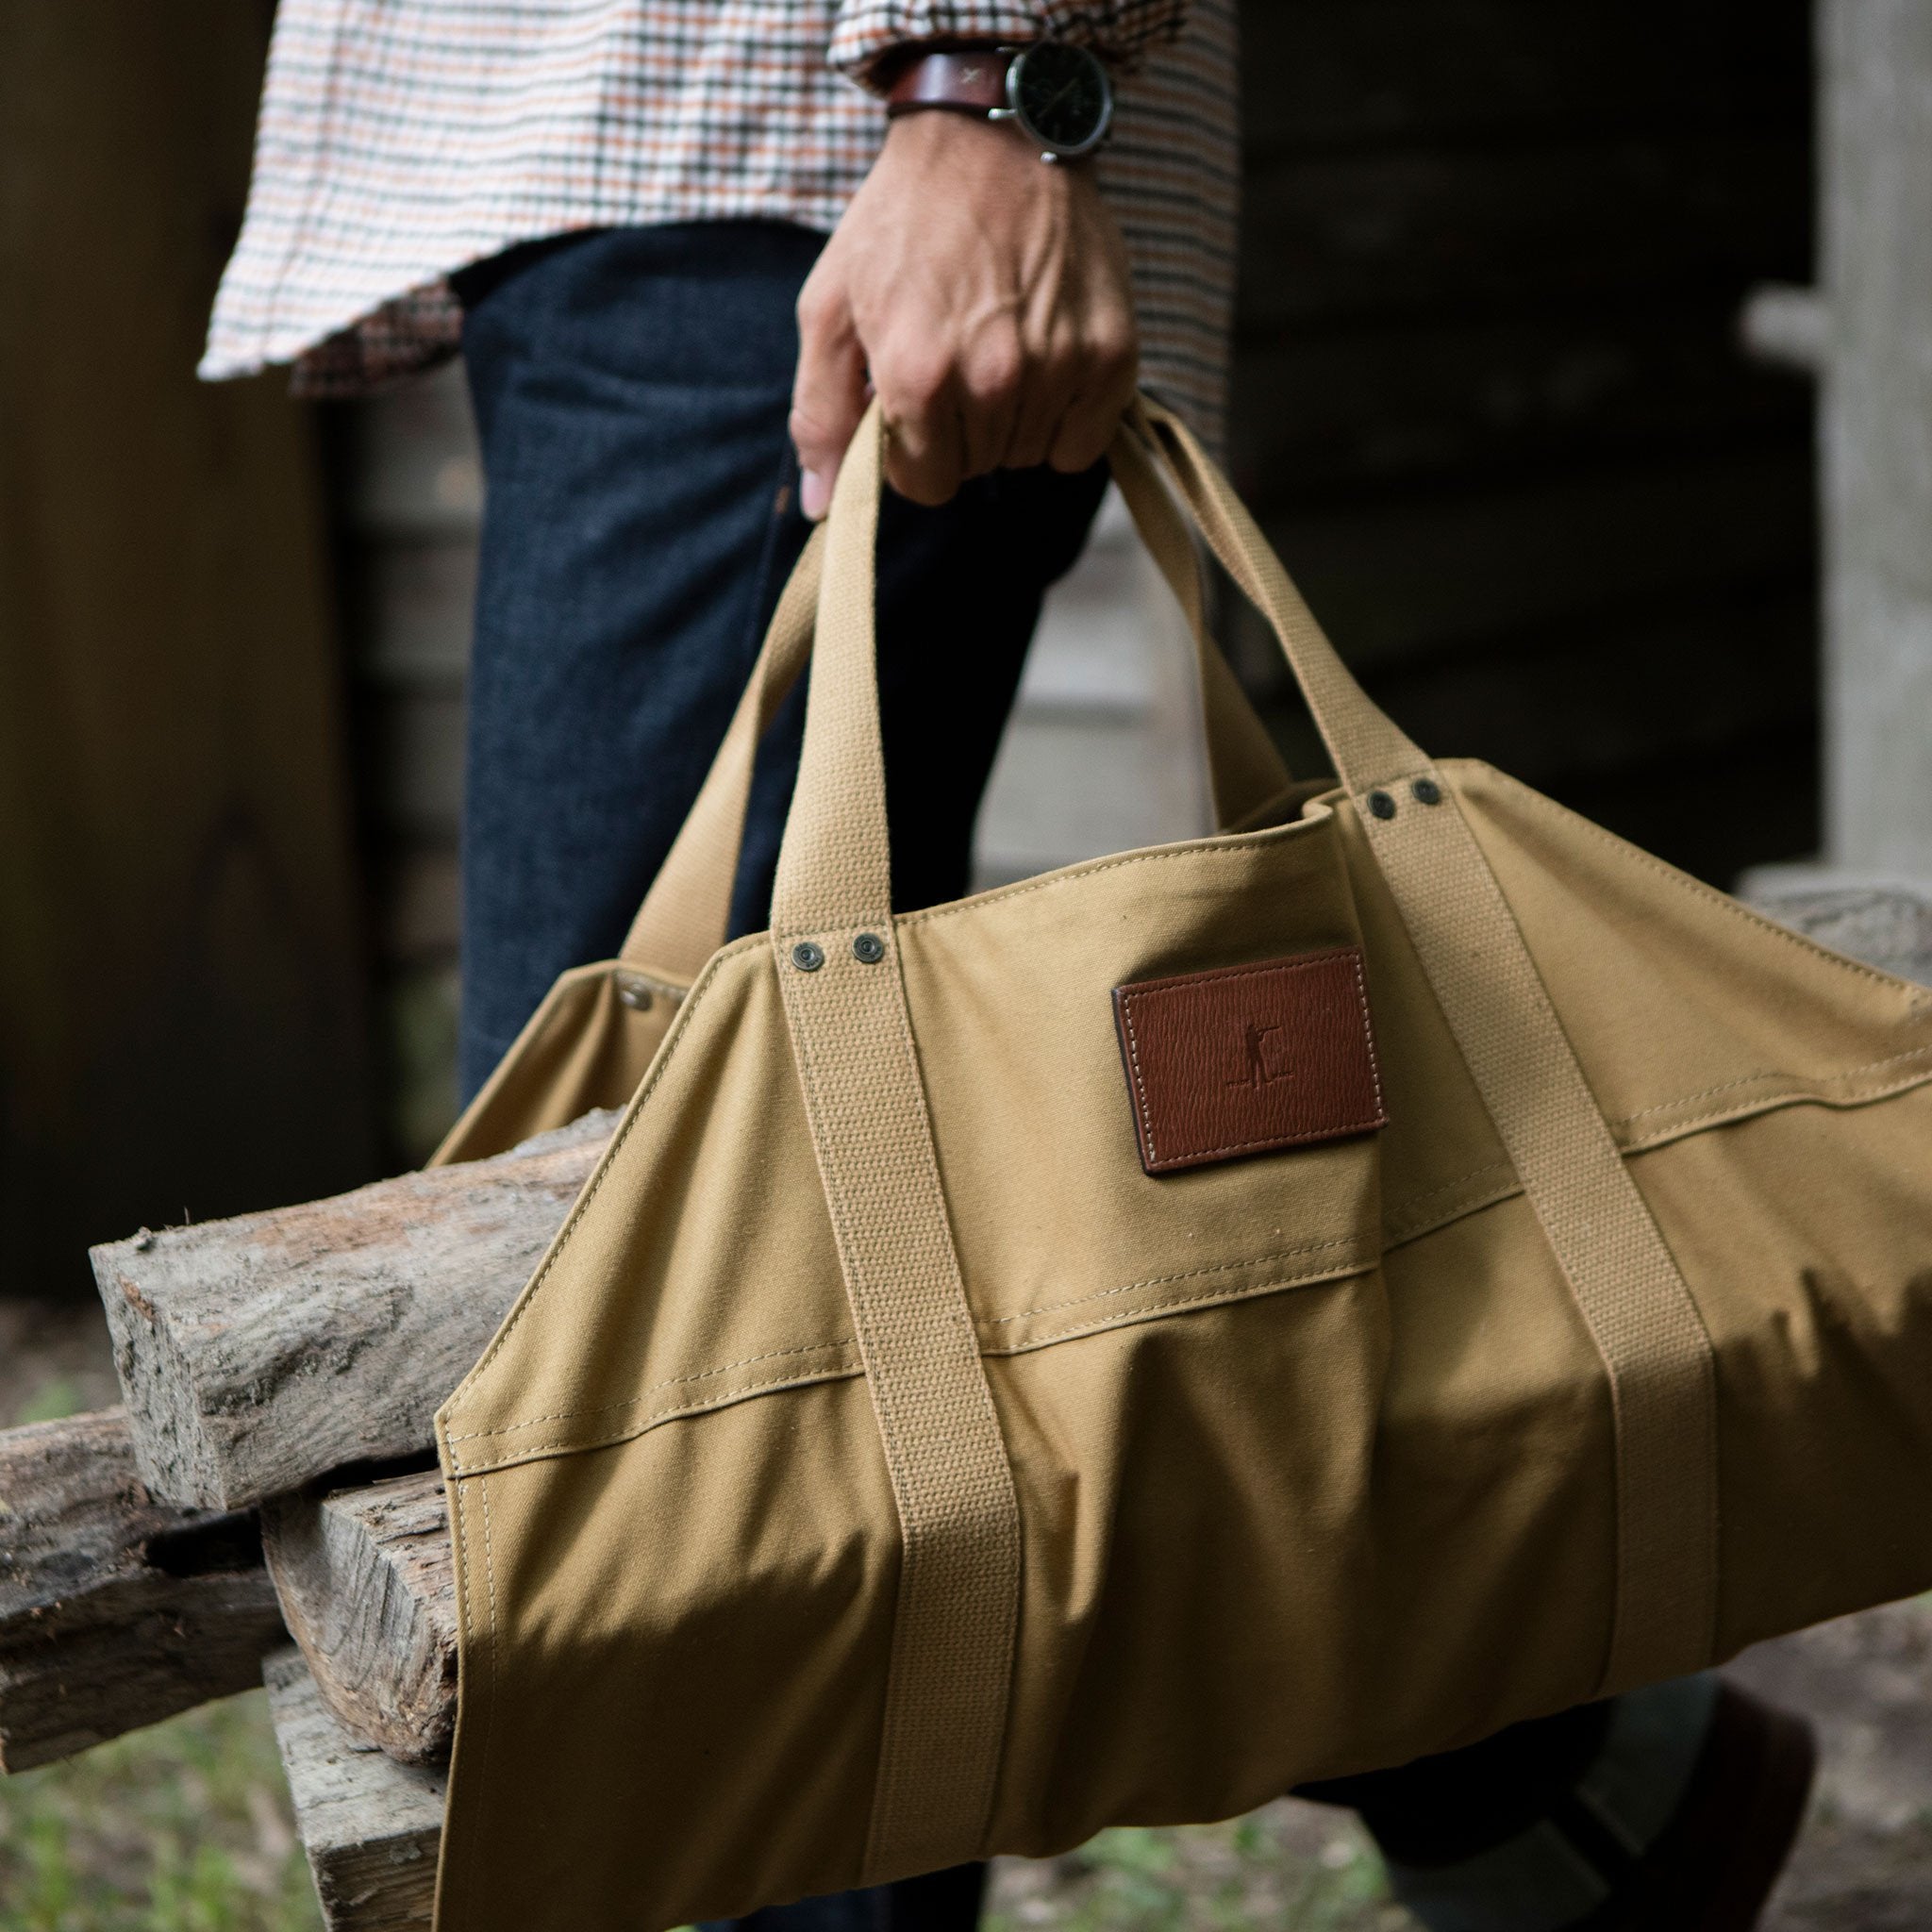 The Firewood Carrier, Signature Canvas